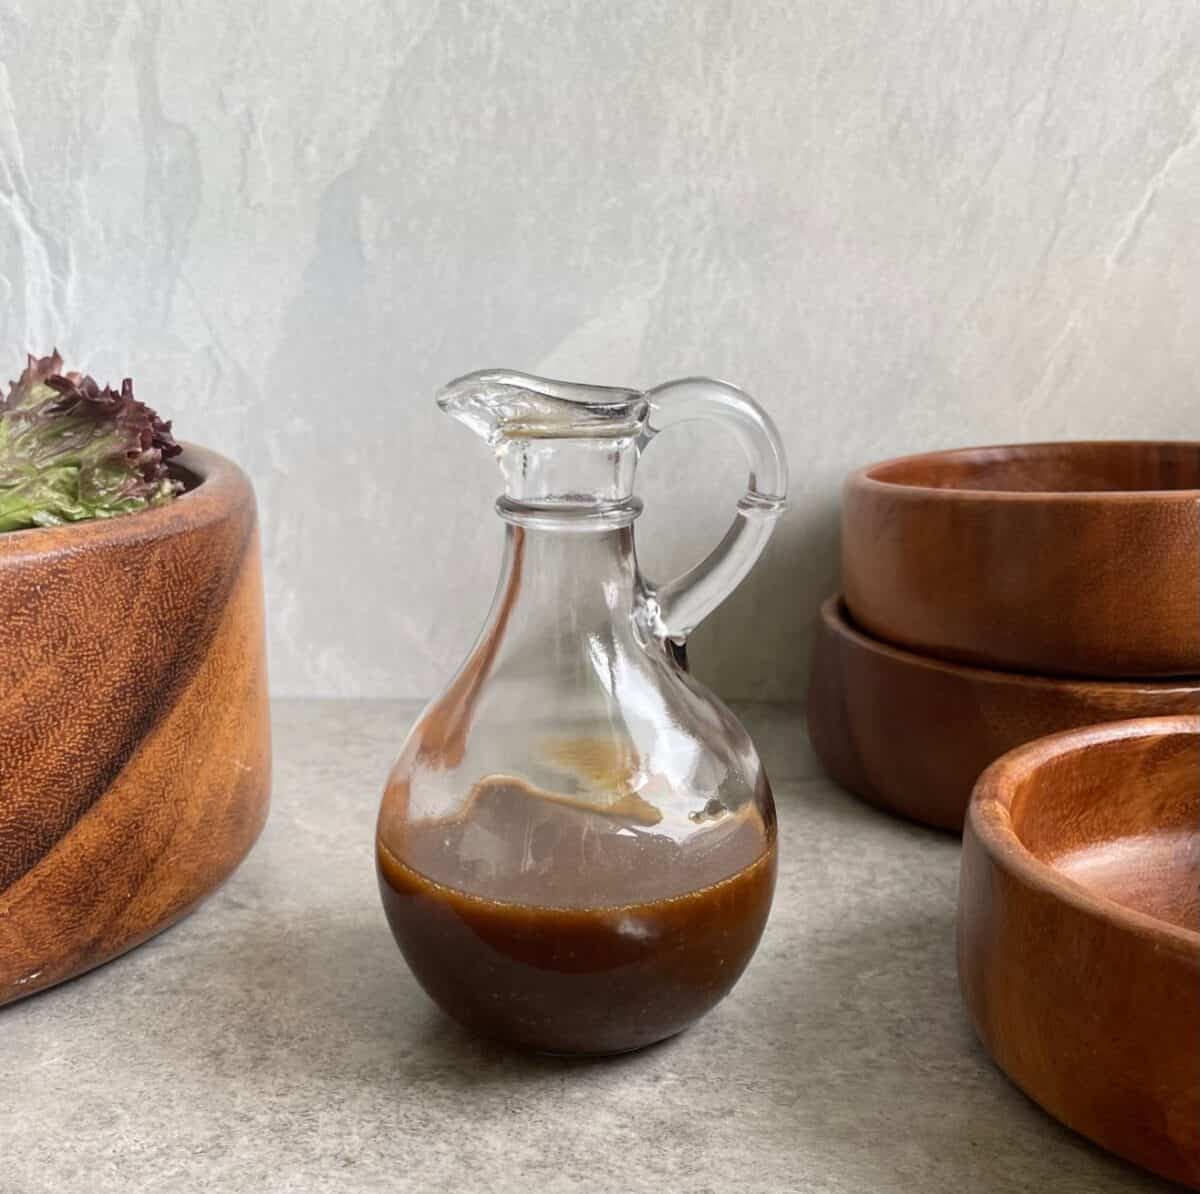 a glass carafe of deep brown salad dressing with wood salad bowls.